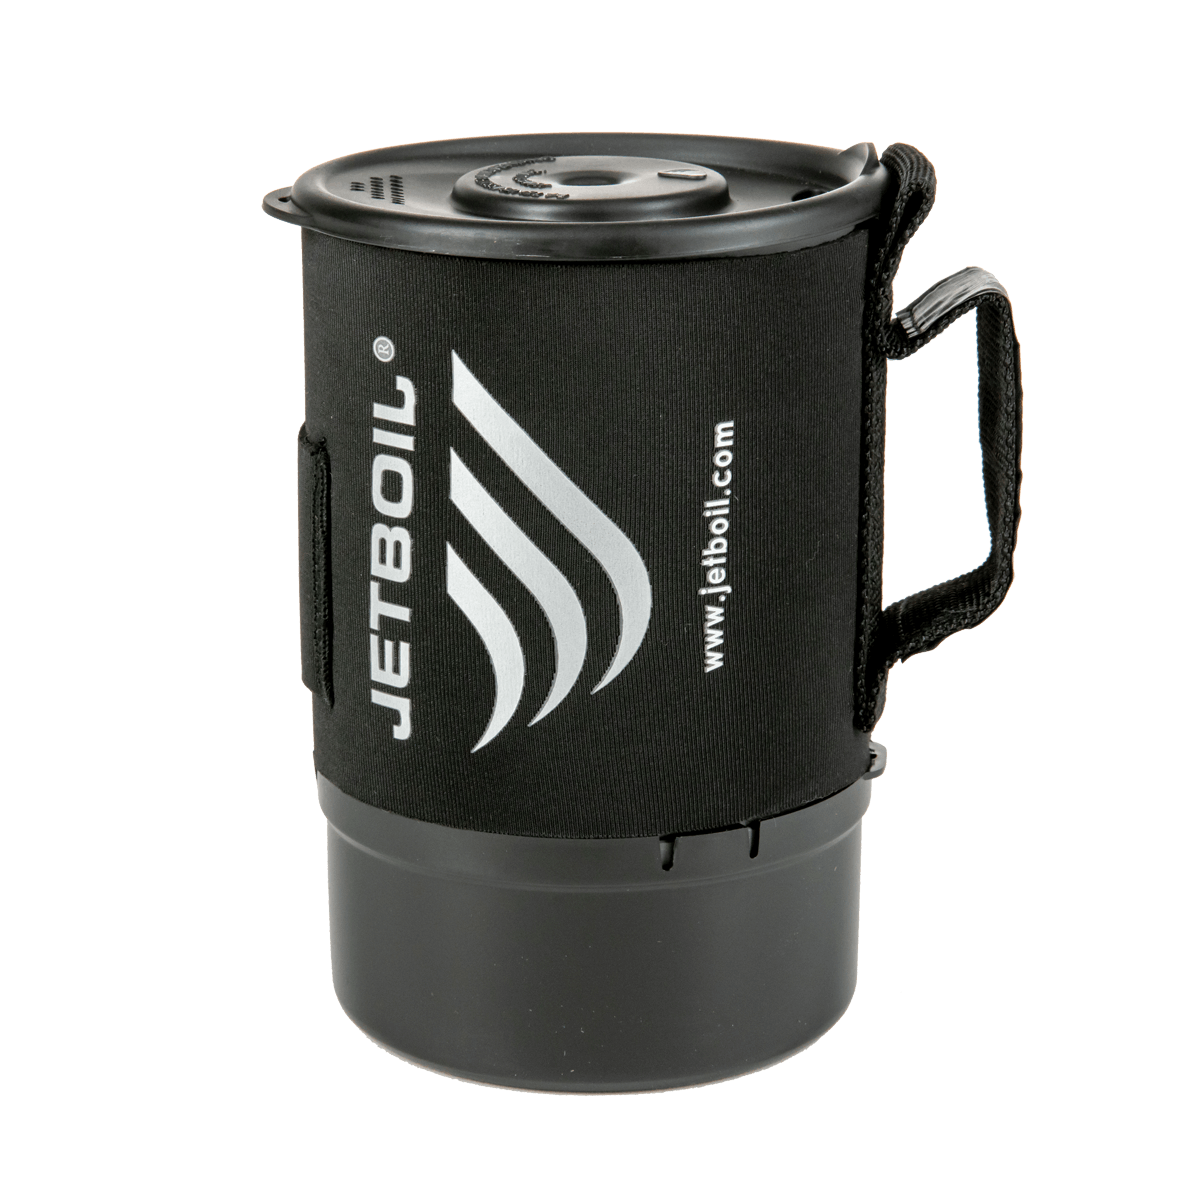 JetBoil - Zip Cooking System